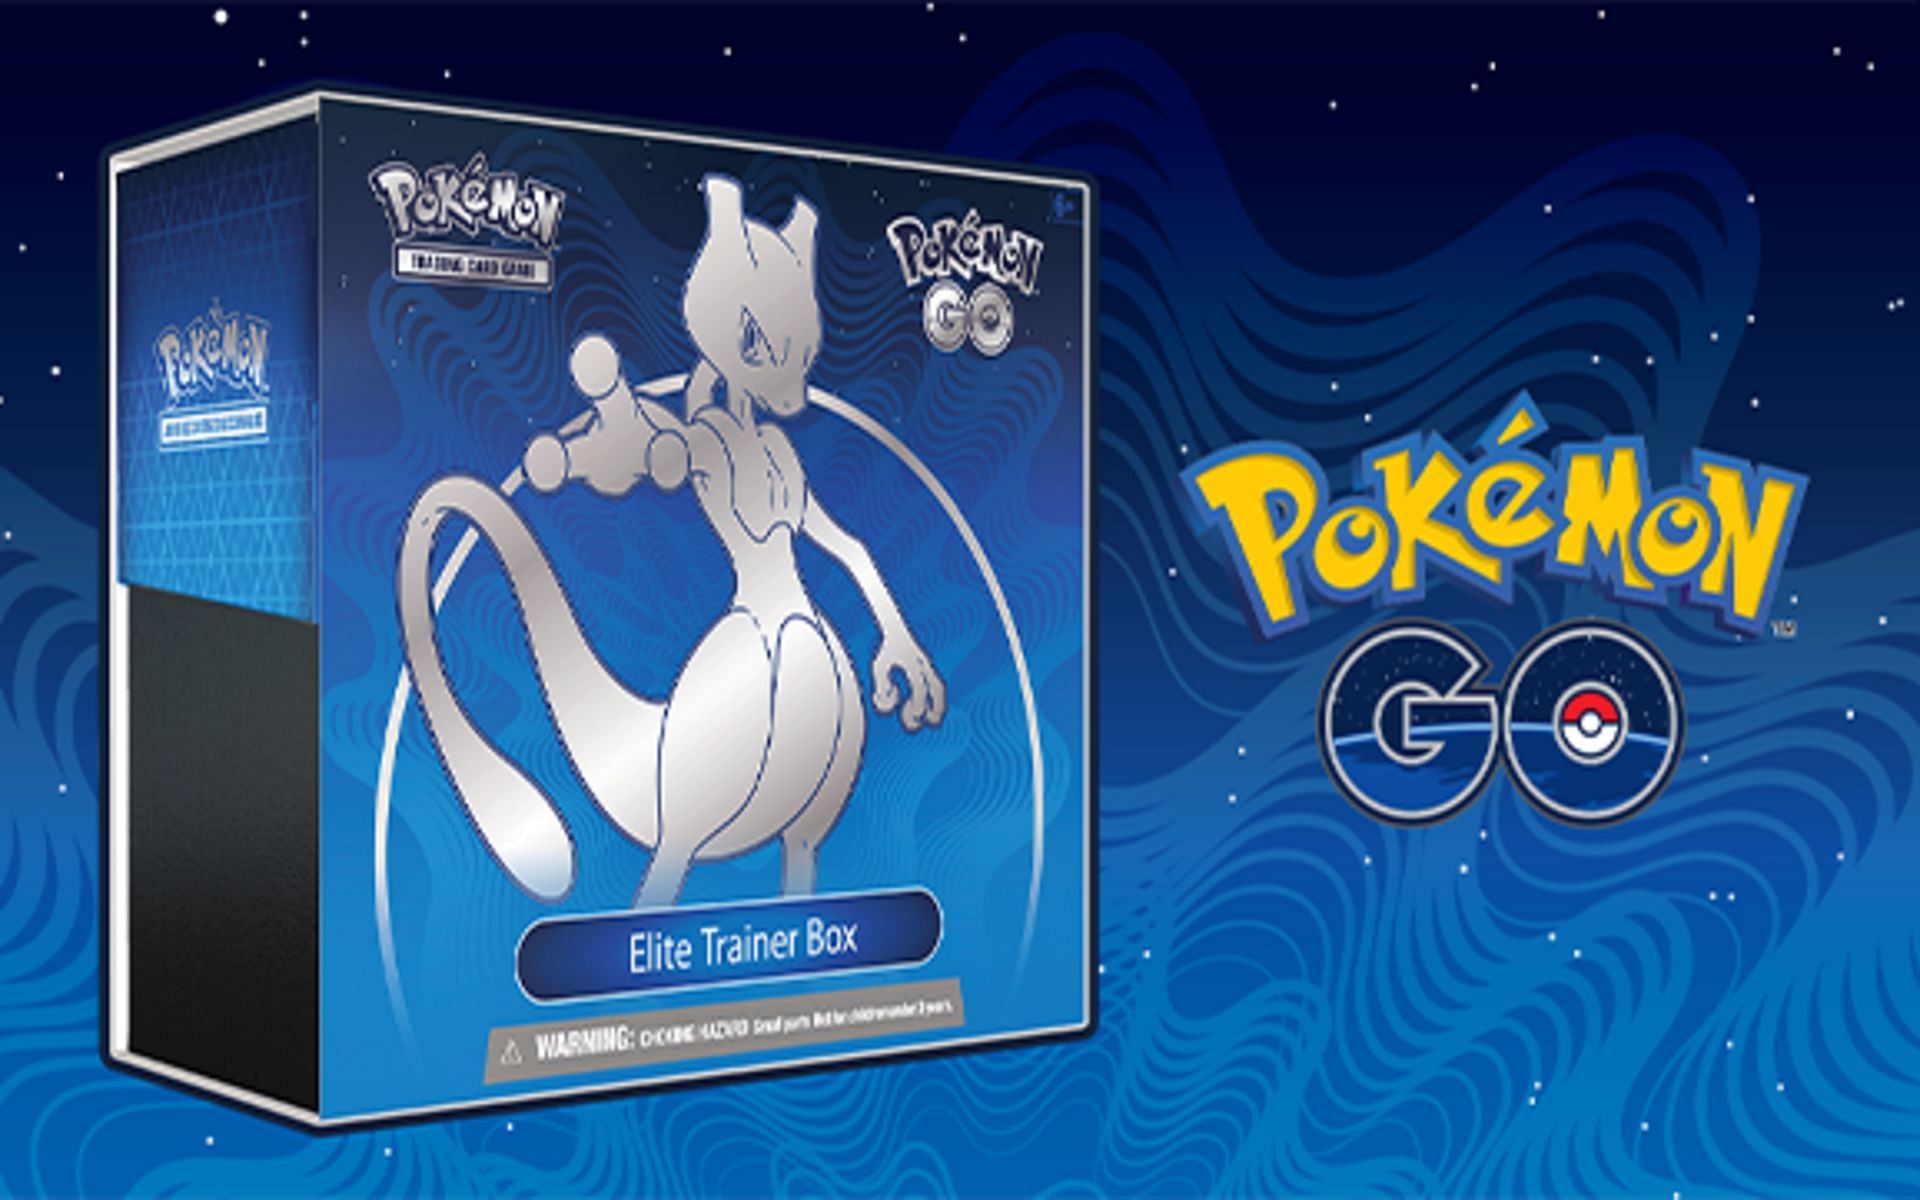 Trainers can preorder an Elite Trainer Box (Image via The Pokemon Company)